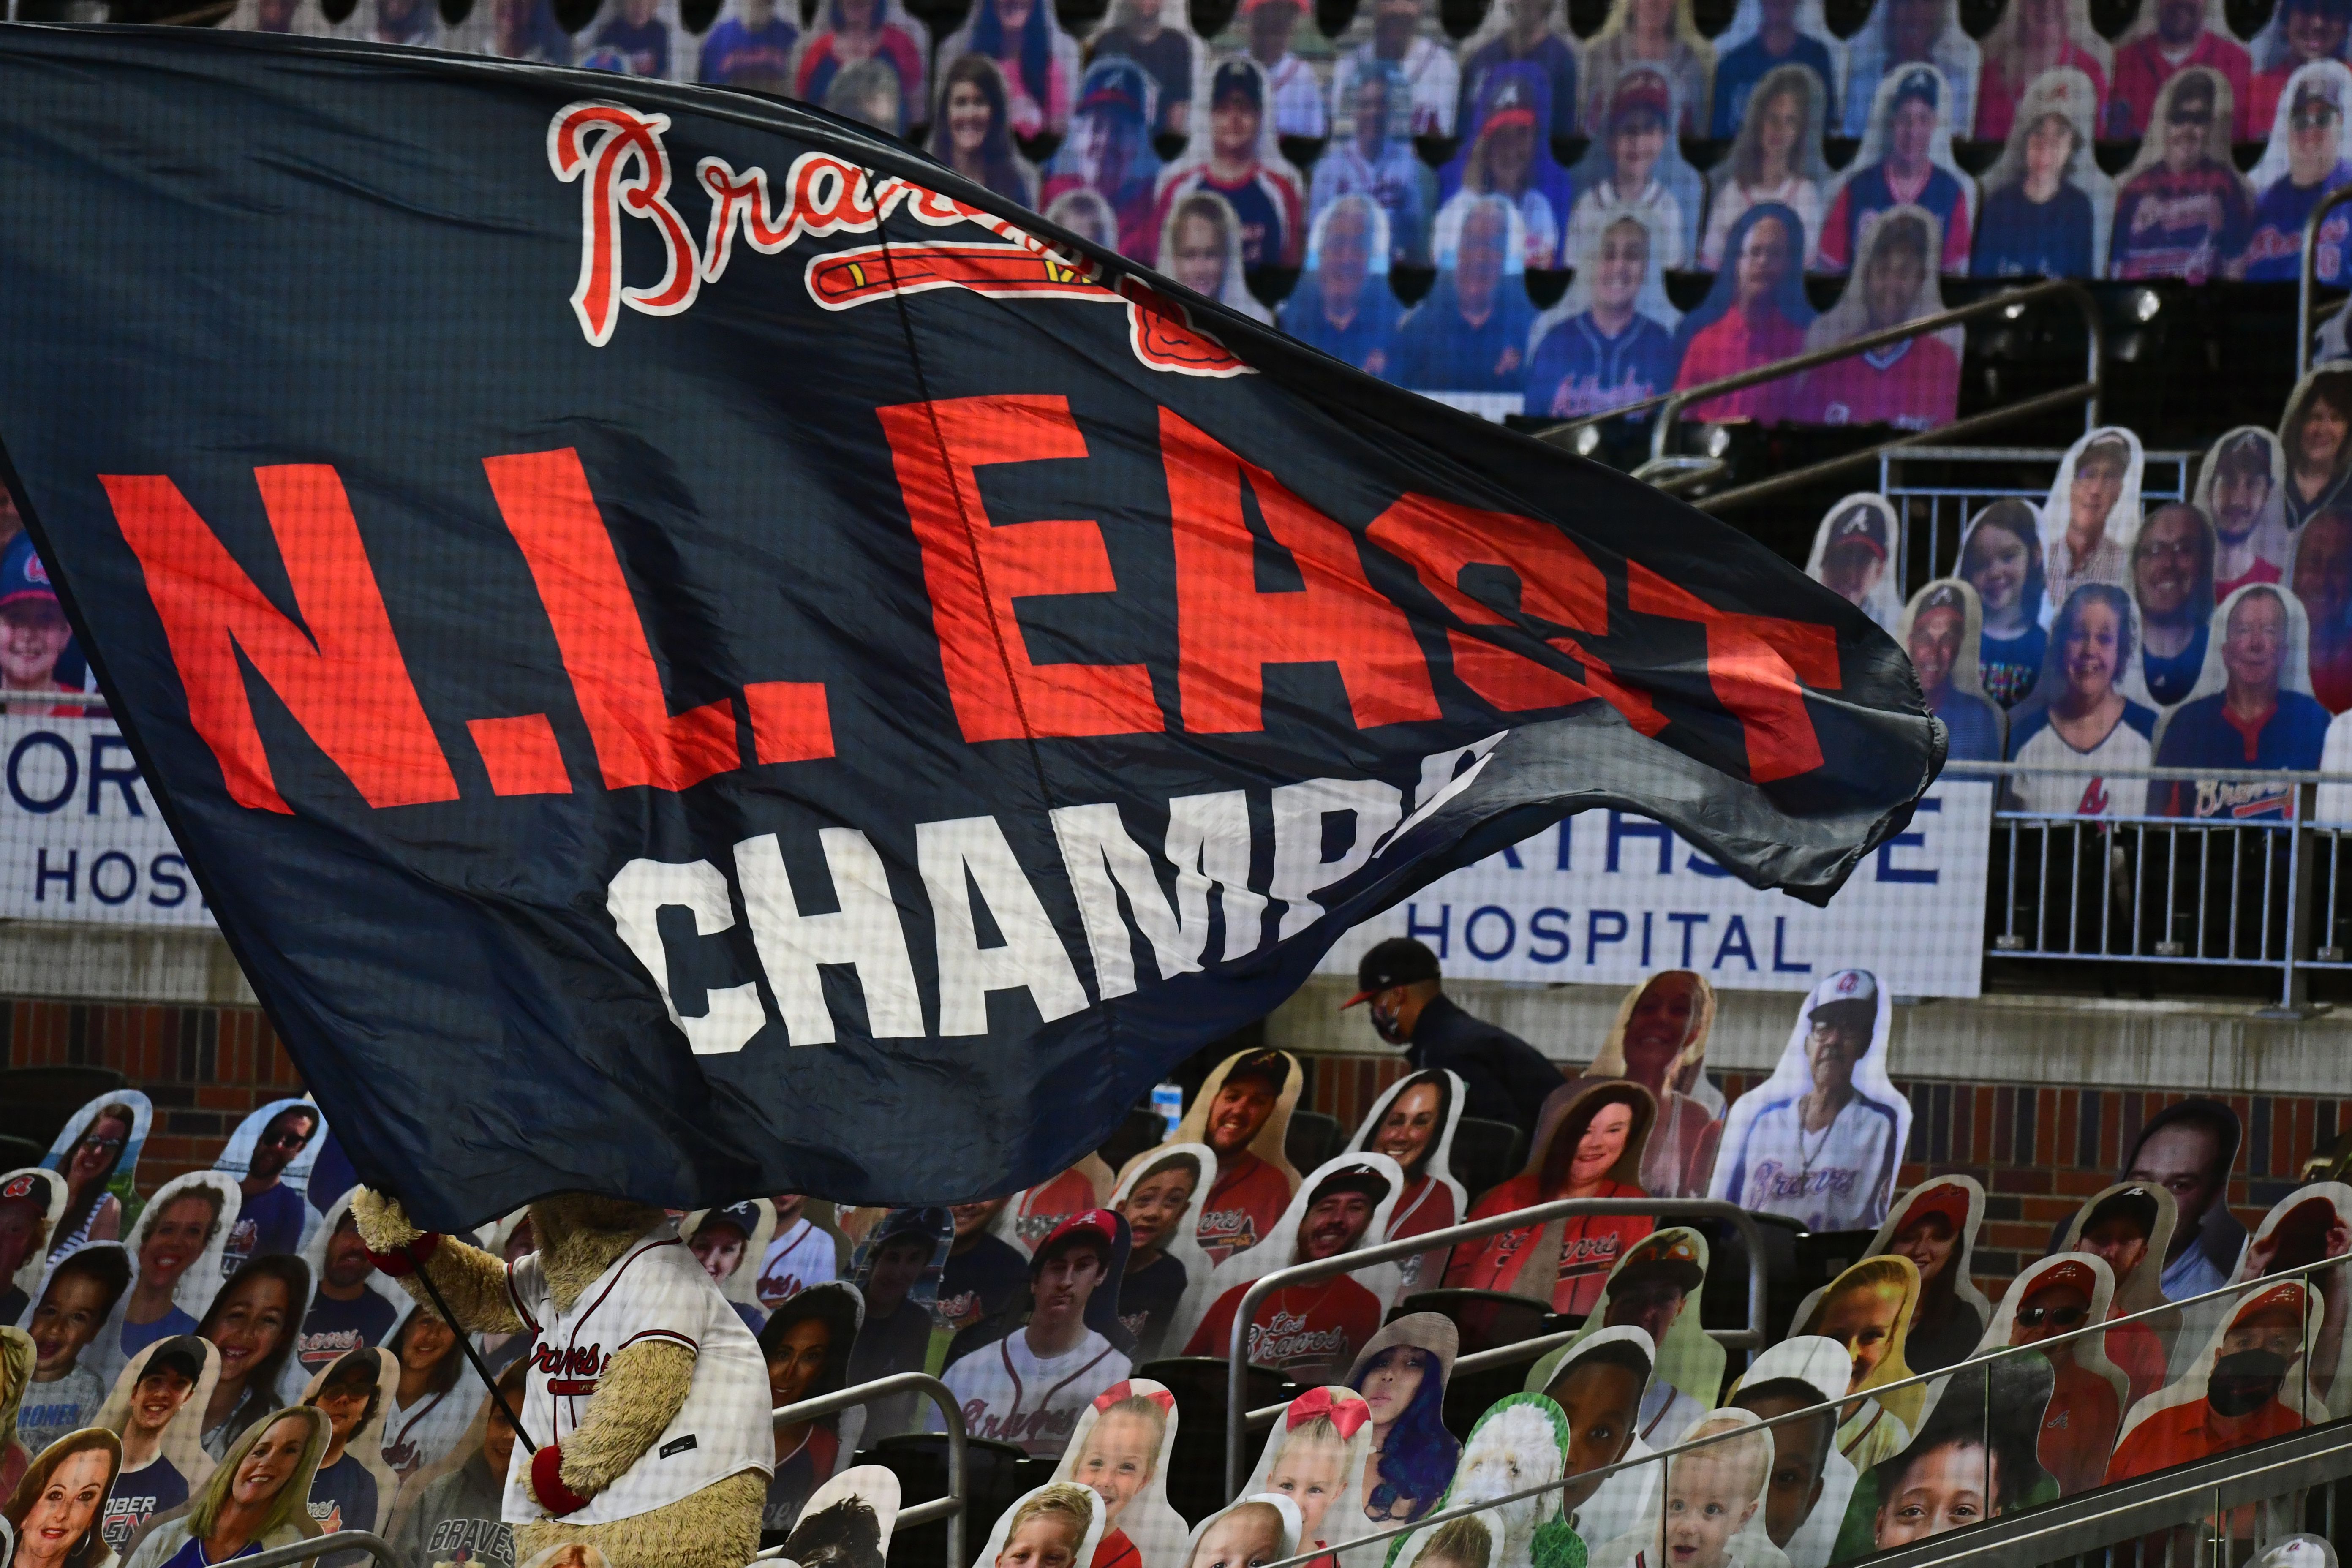 FansEdge - The Braves are the NL East Division CHAMPS for the 5th